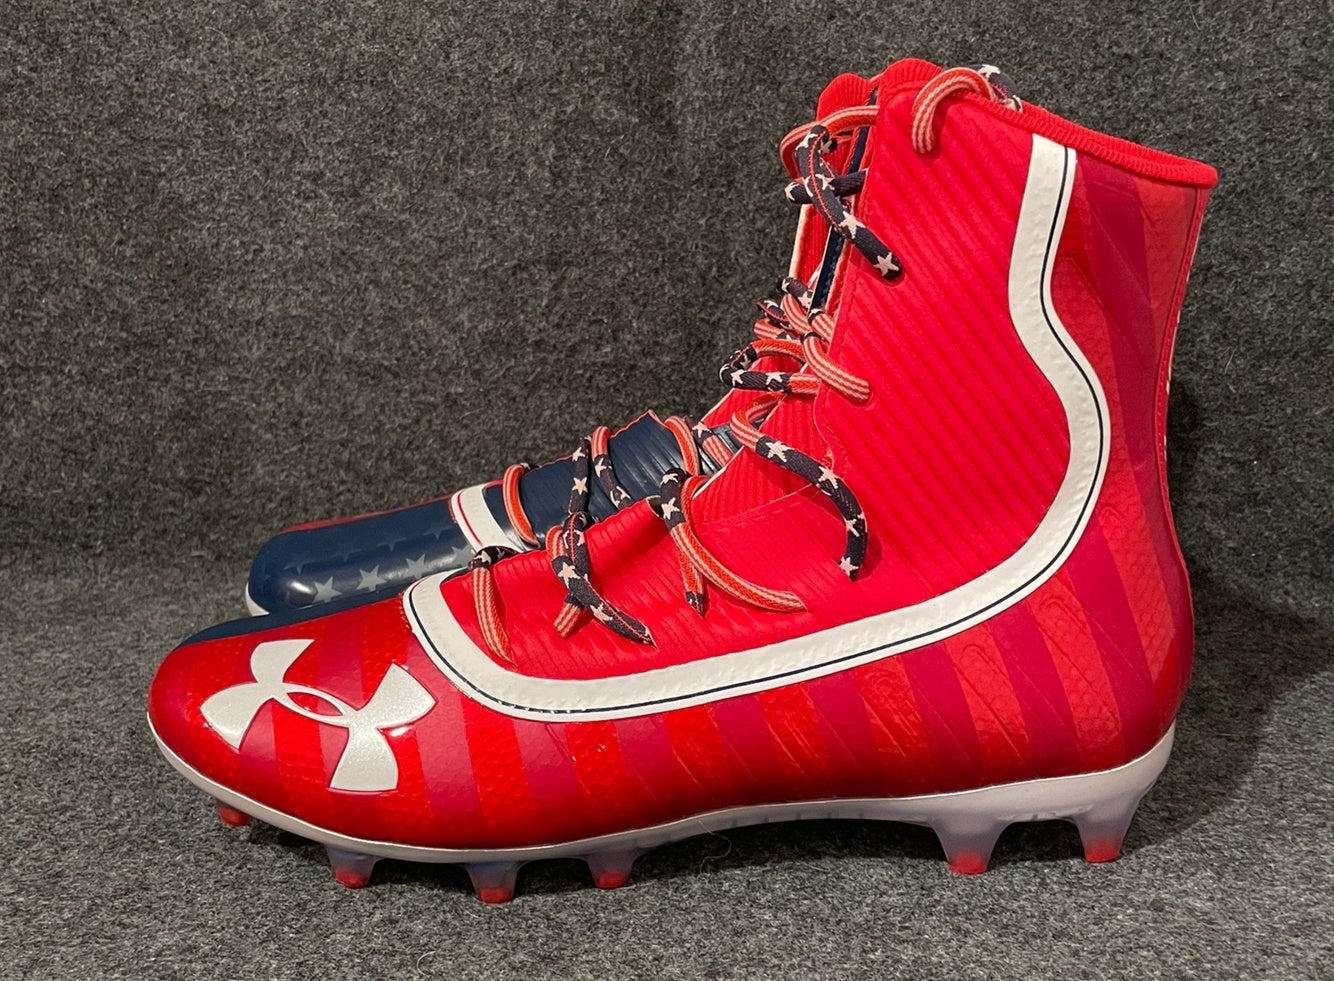 Details about    Under Armour Highlight Limited Edition USA Football Cleats 3021191-600 Sz 12 